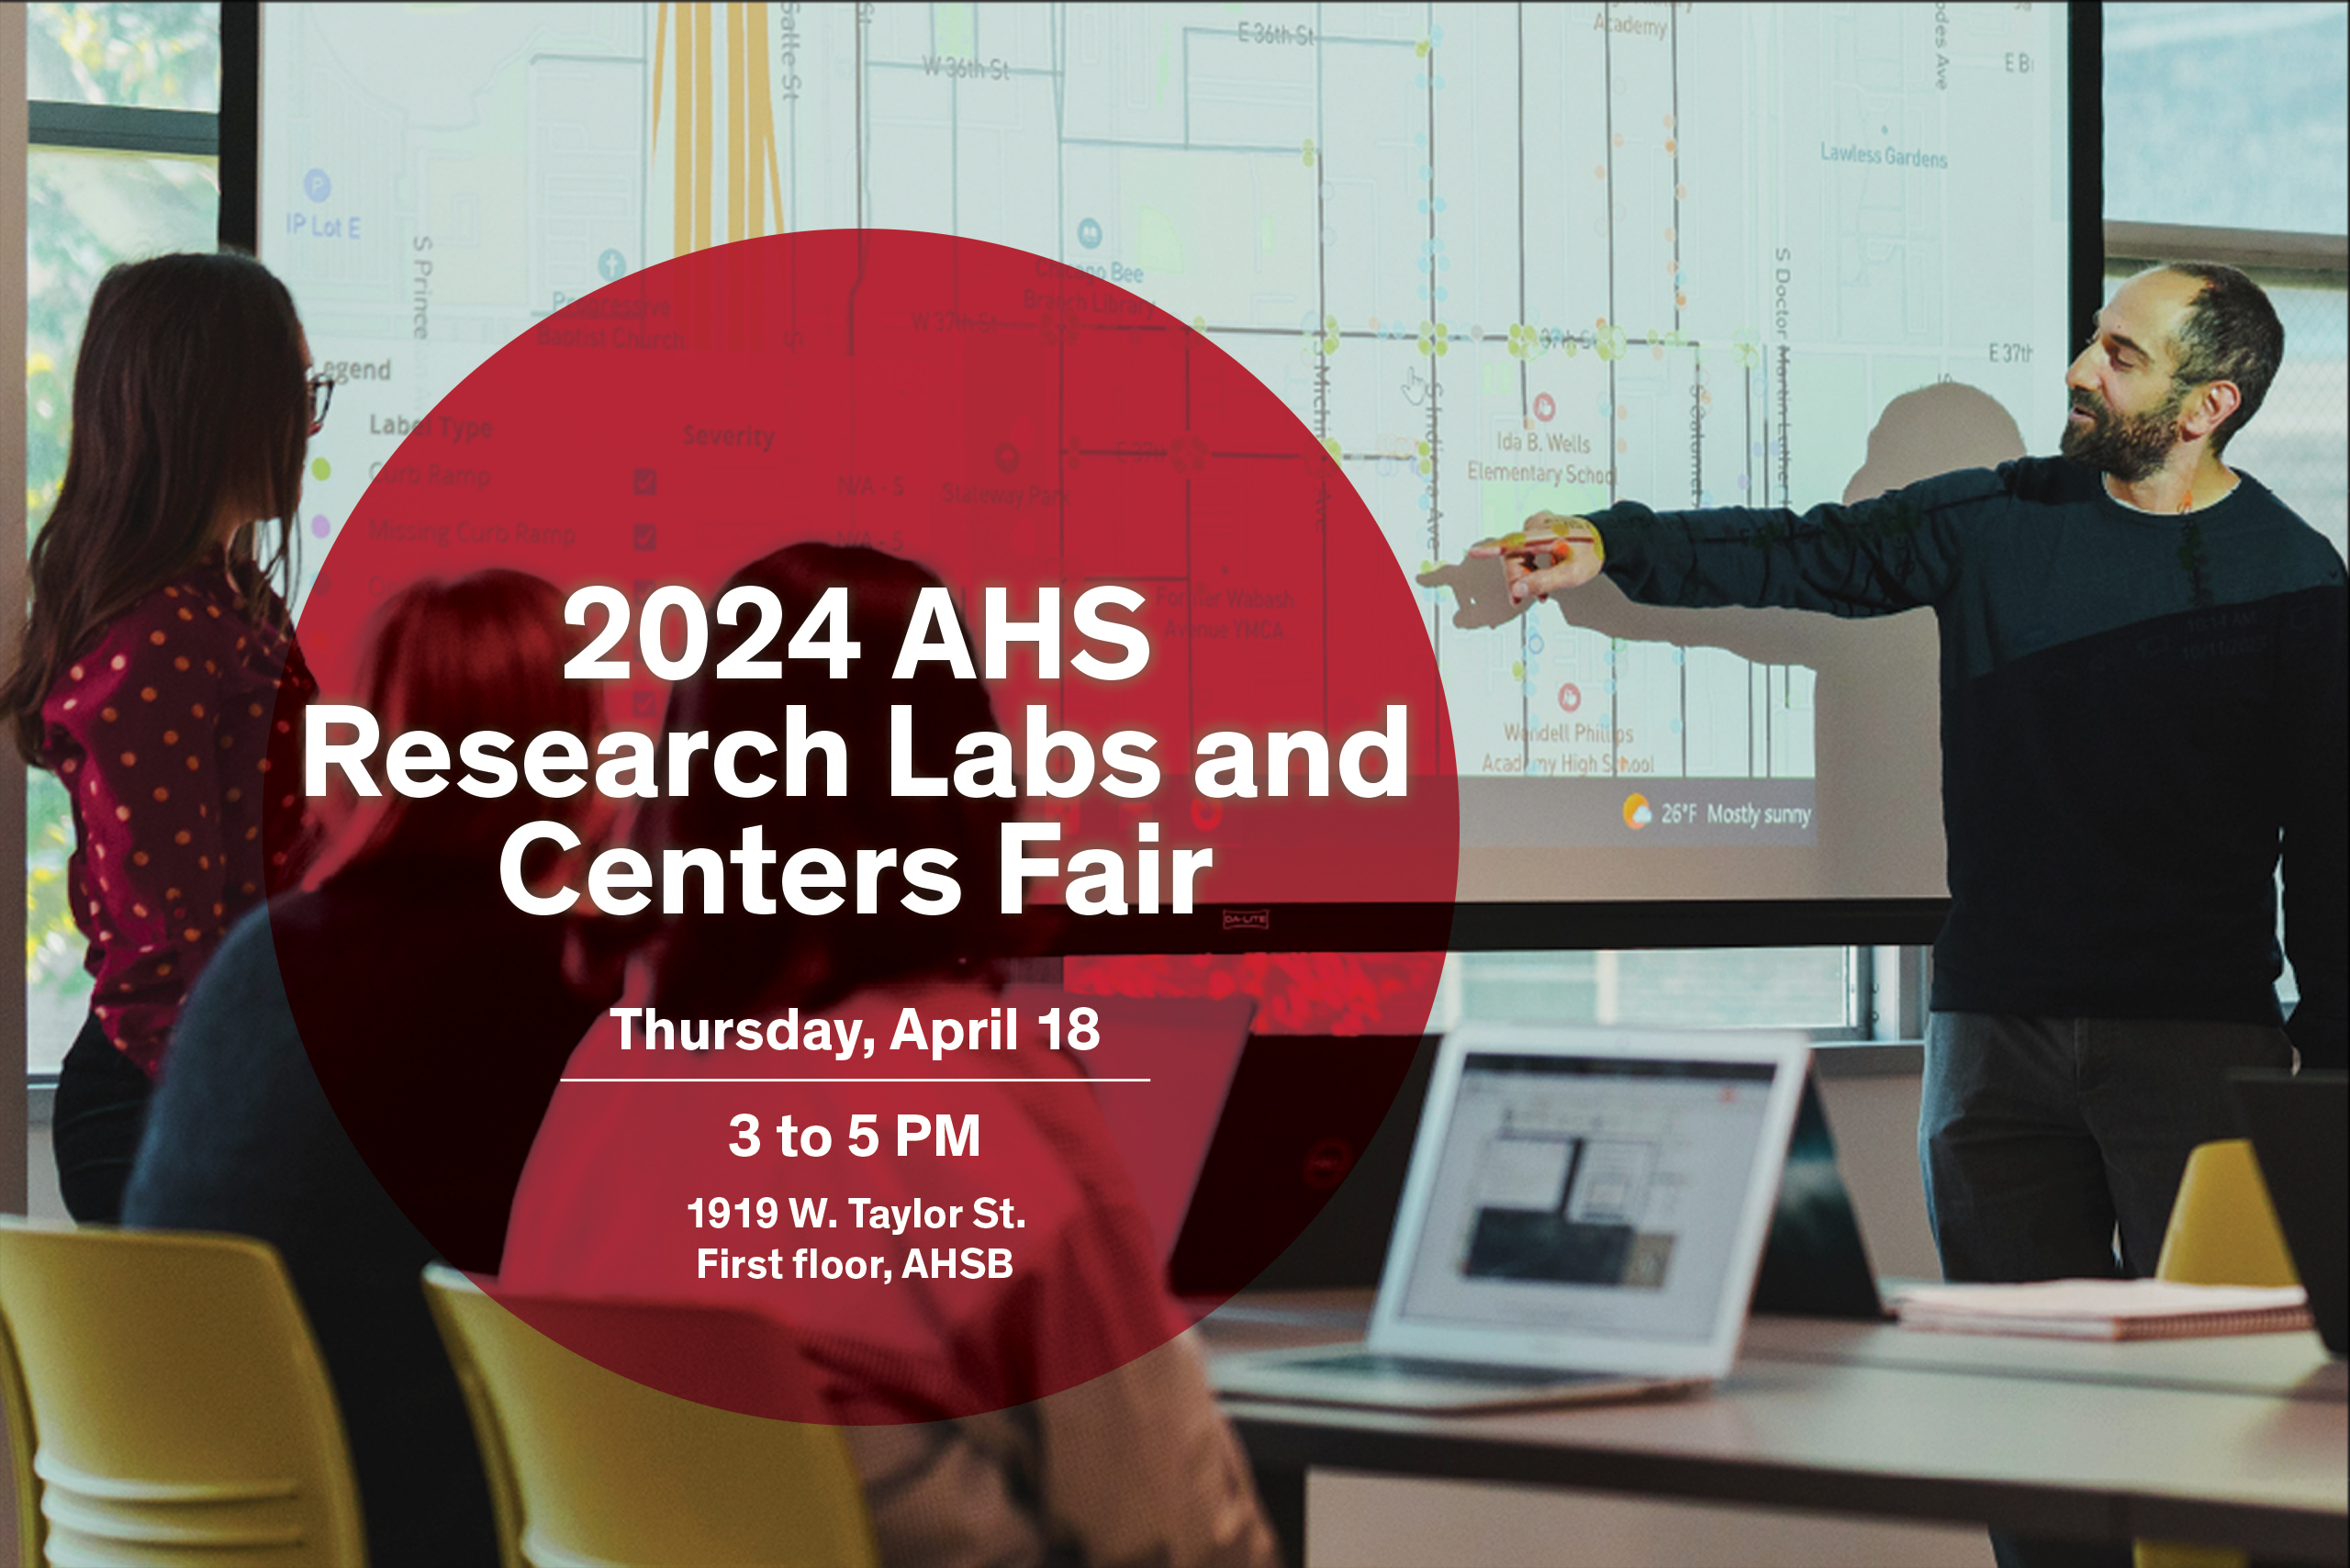 2024 AHS Research Labs and Centers Fair ad